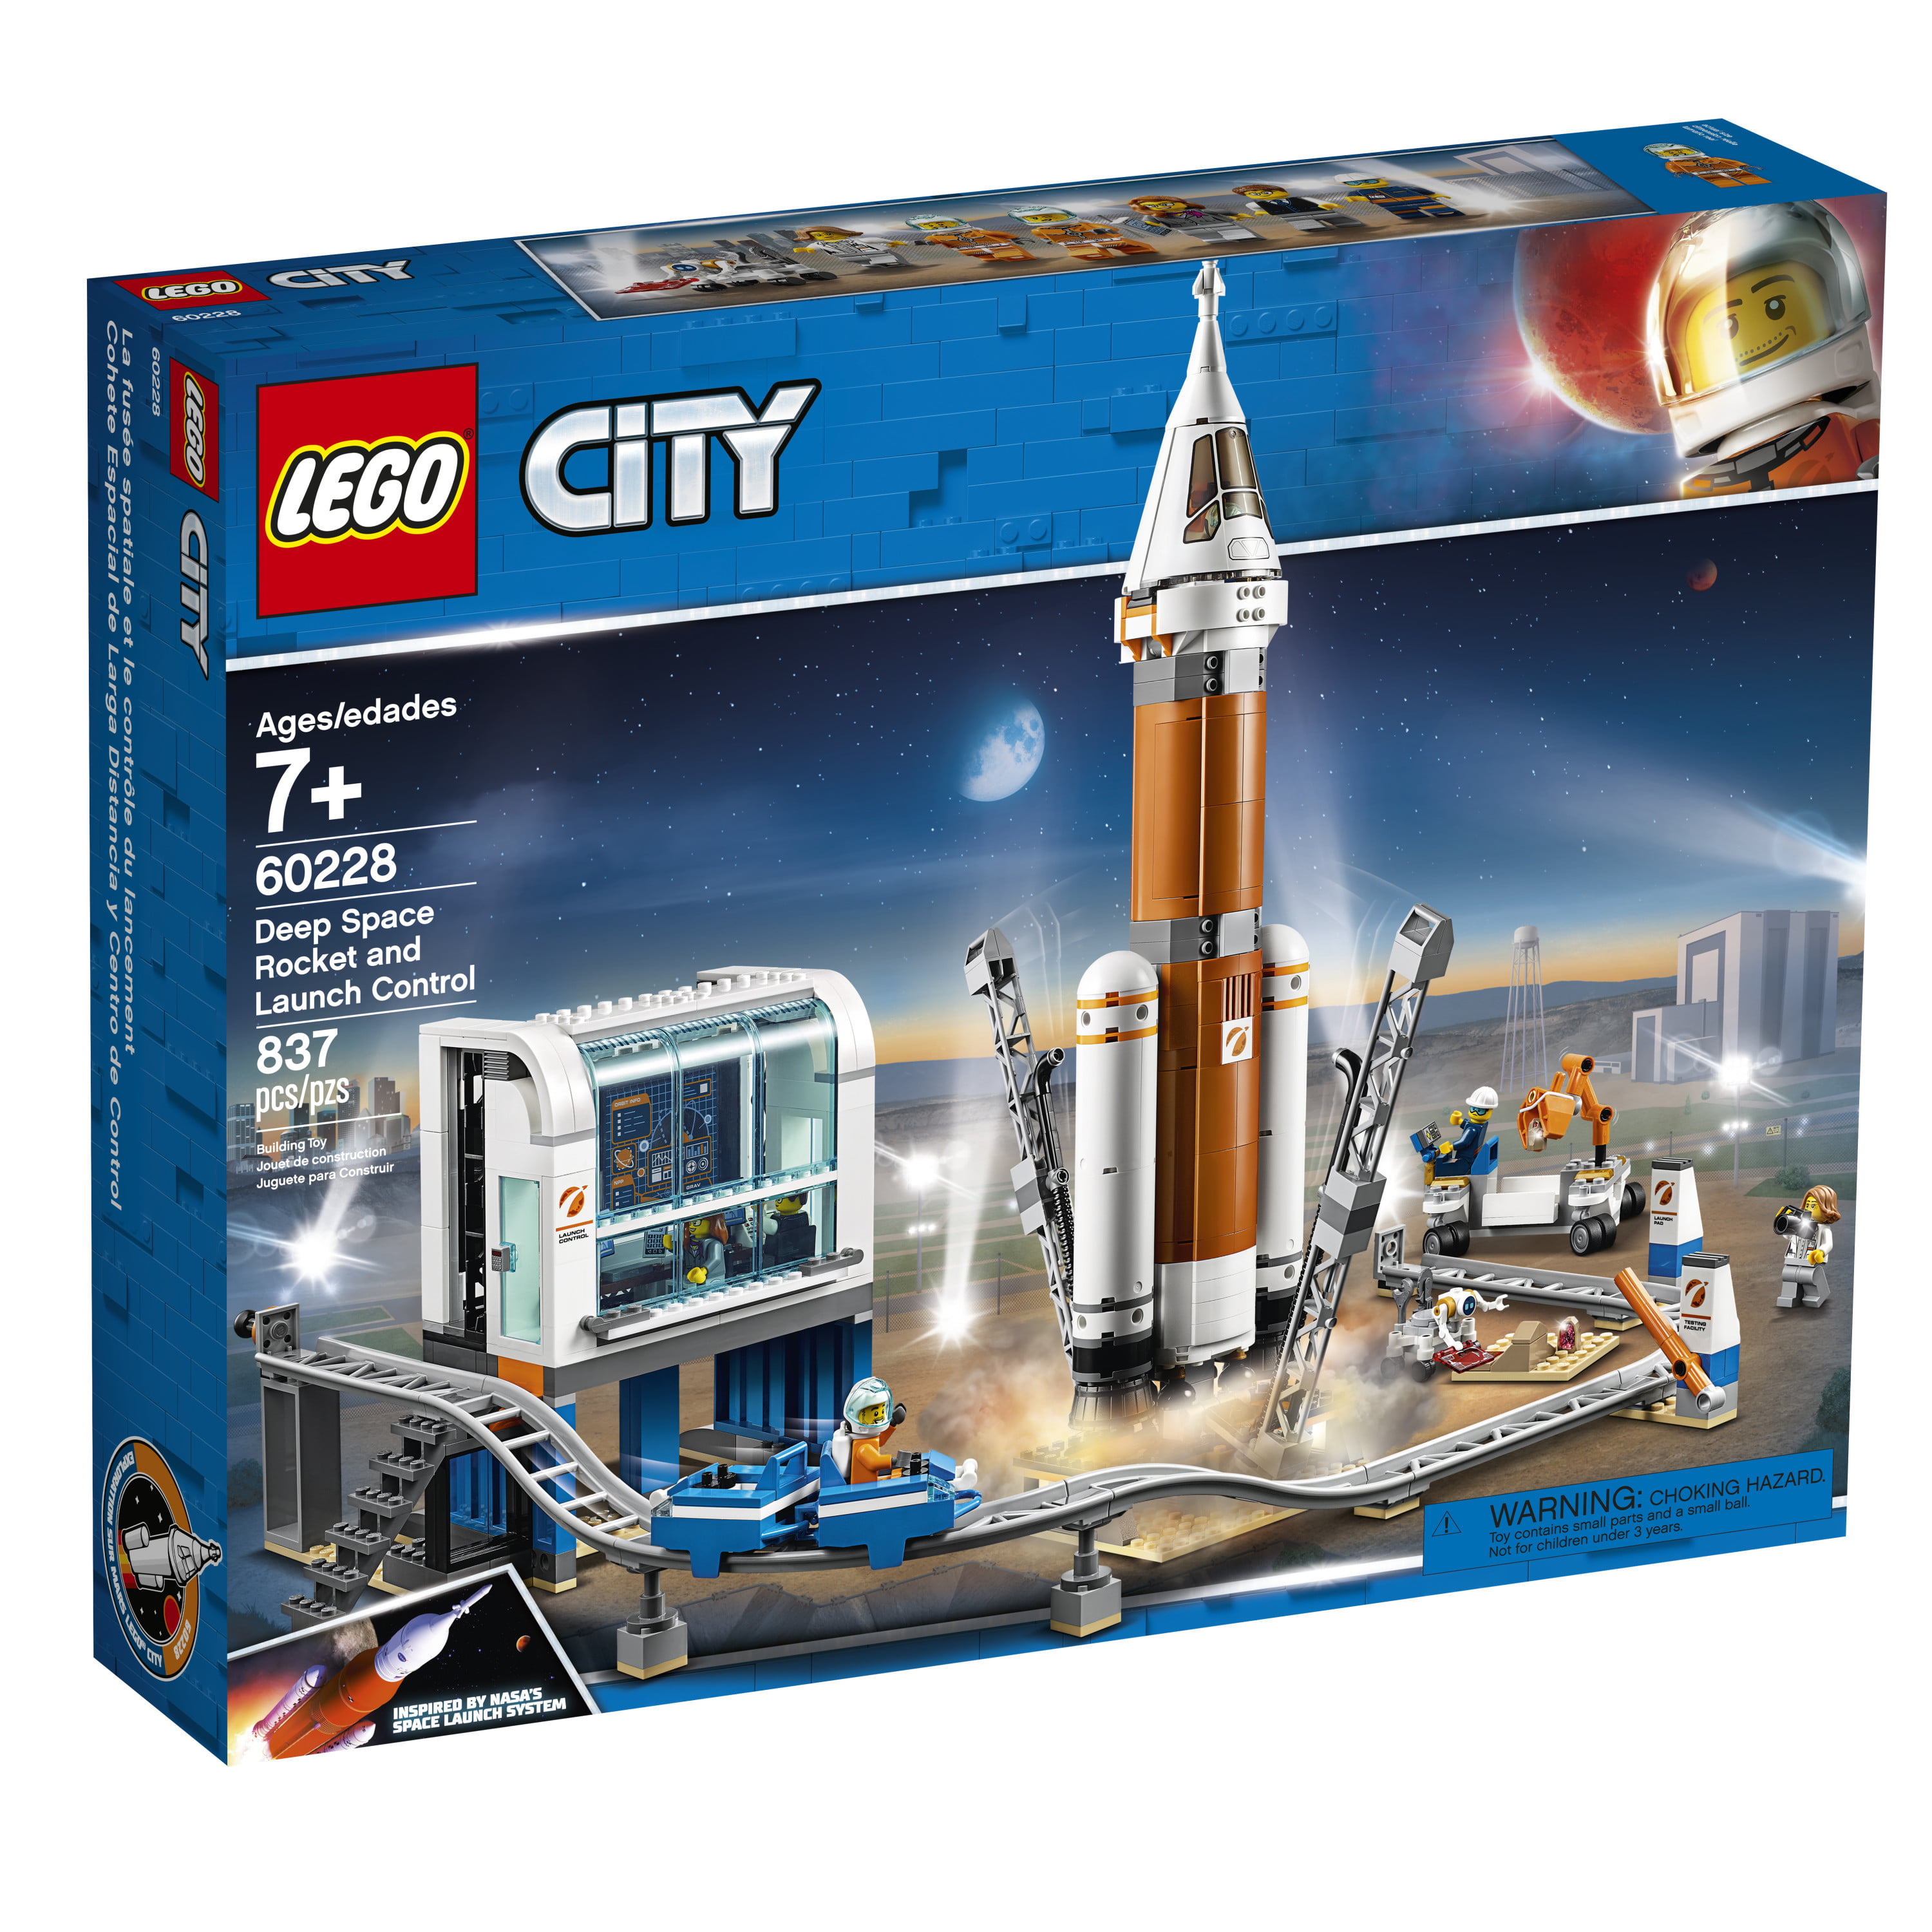 6251727 City Space Space Rocket and 60228 Model Rocket Building Kit with Toy Monorail, - Walmart.com